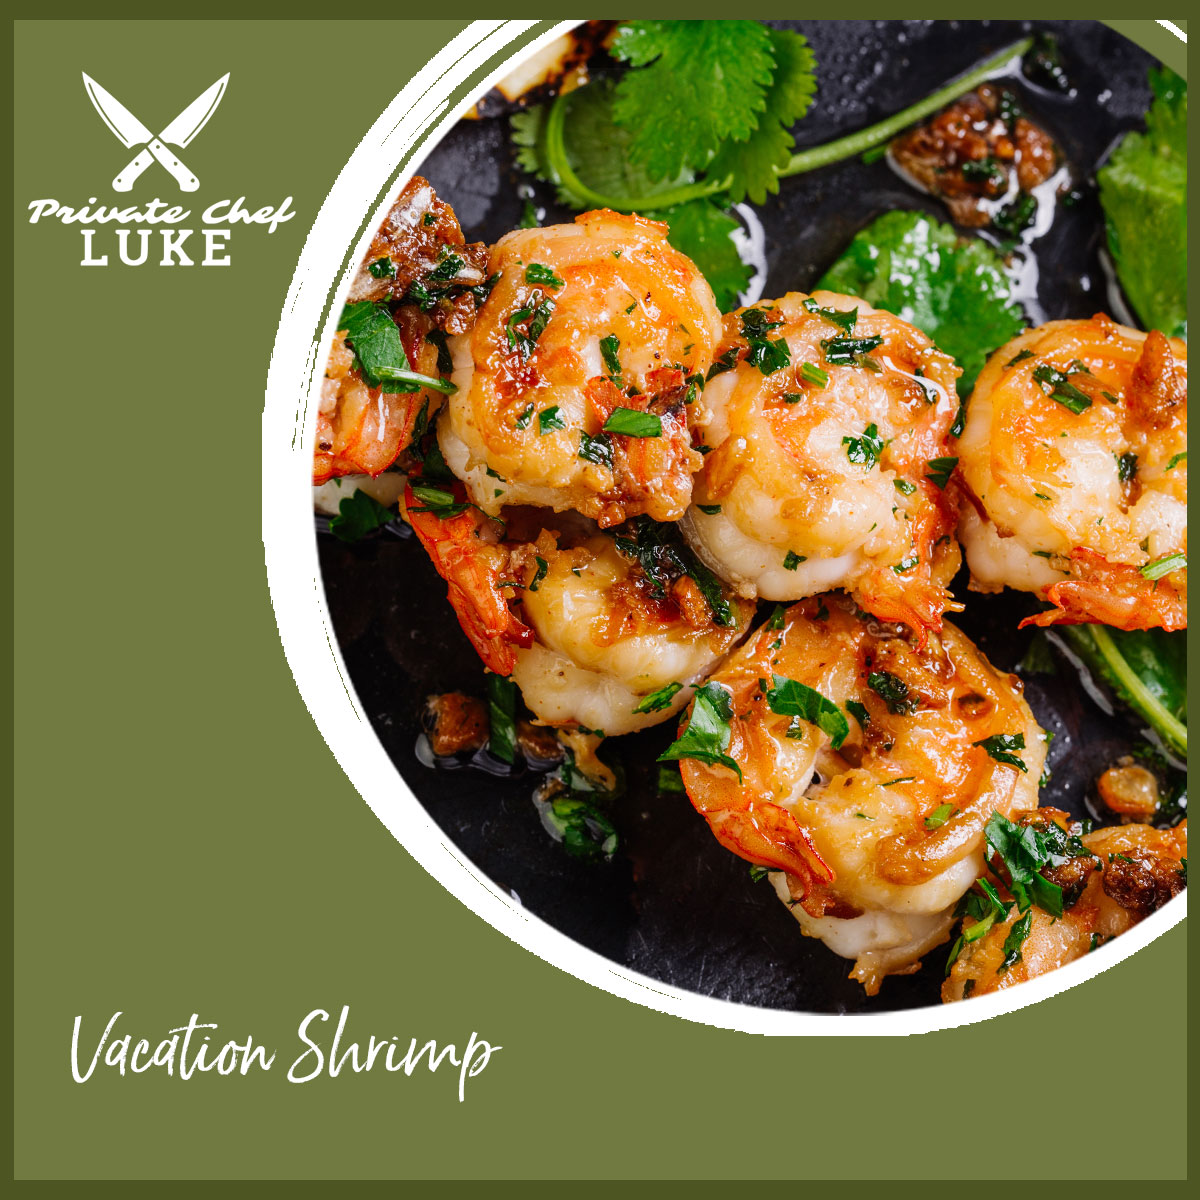 Download the Recipe for Chef Luke's Vacation Shrimp